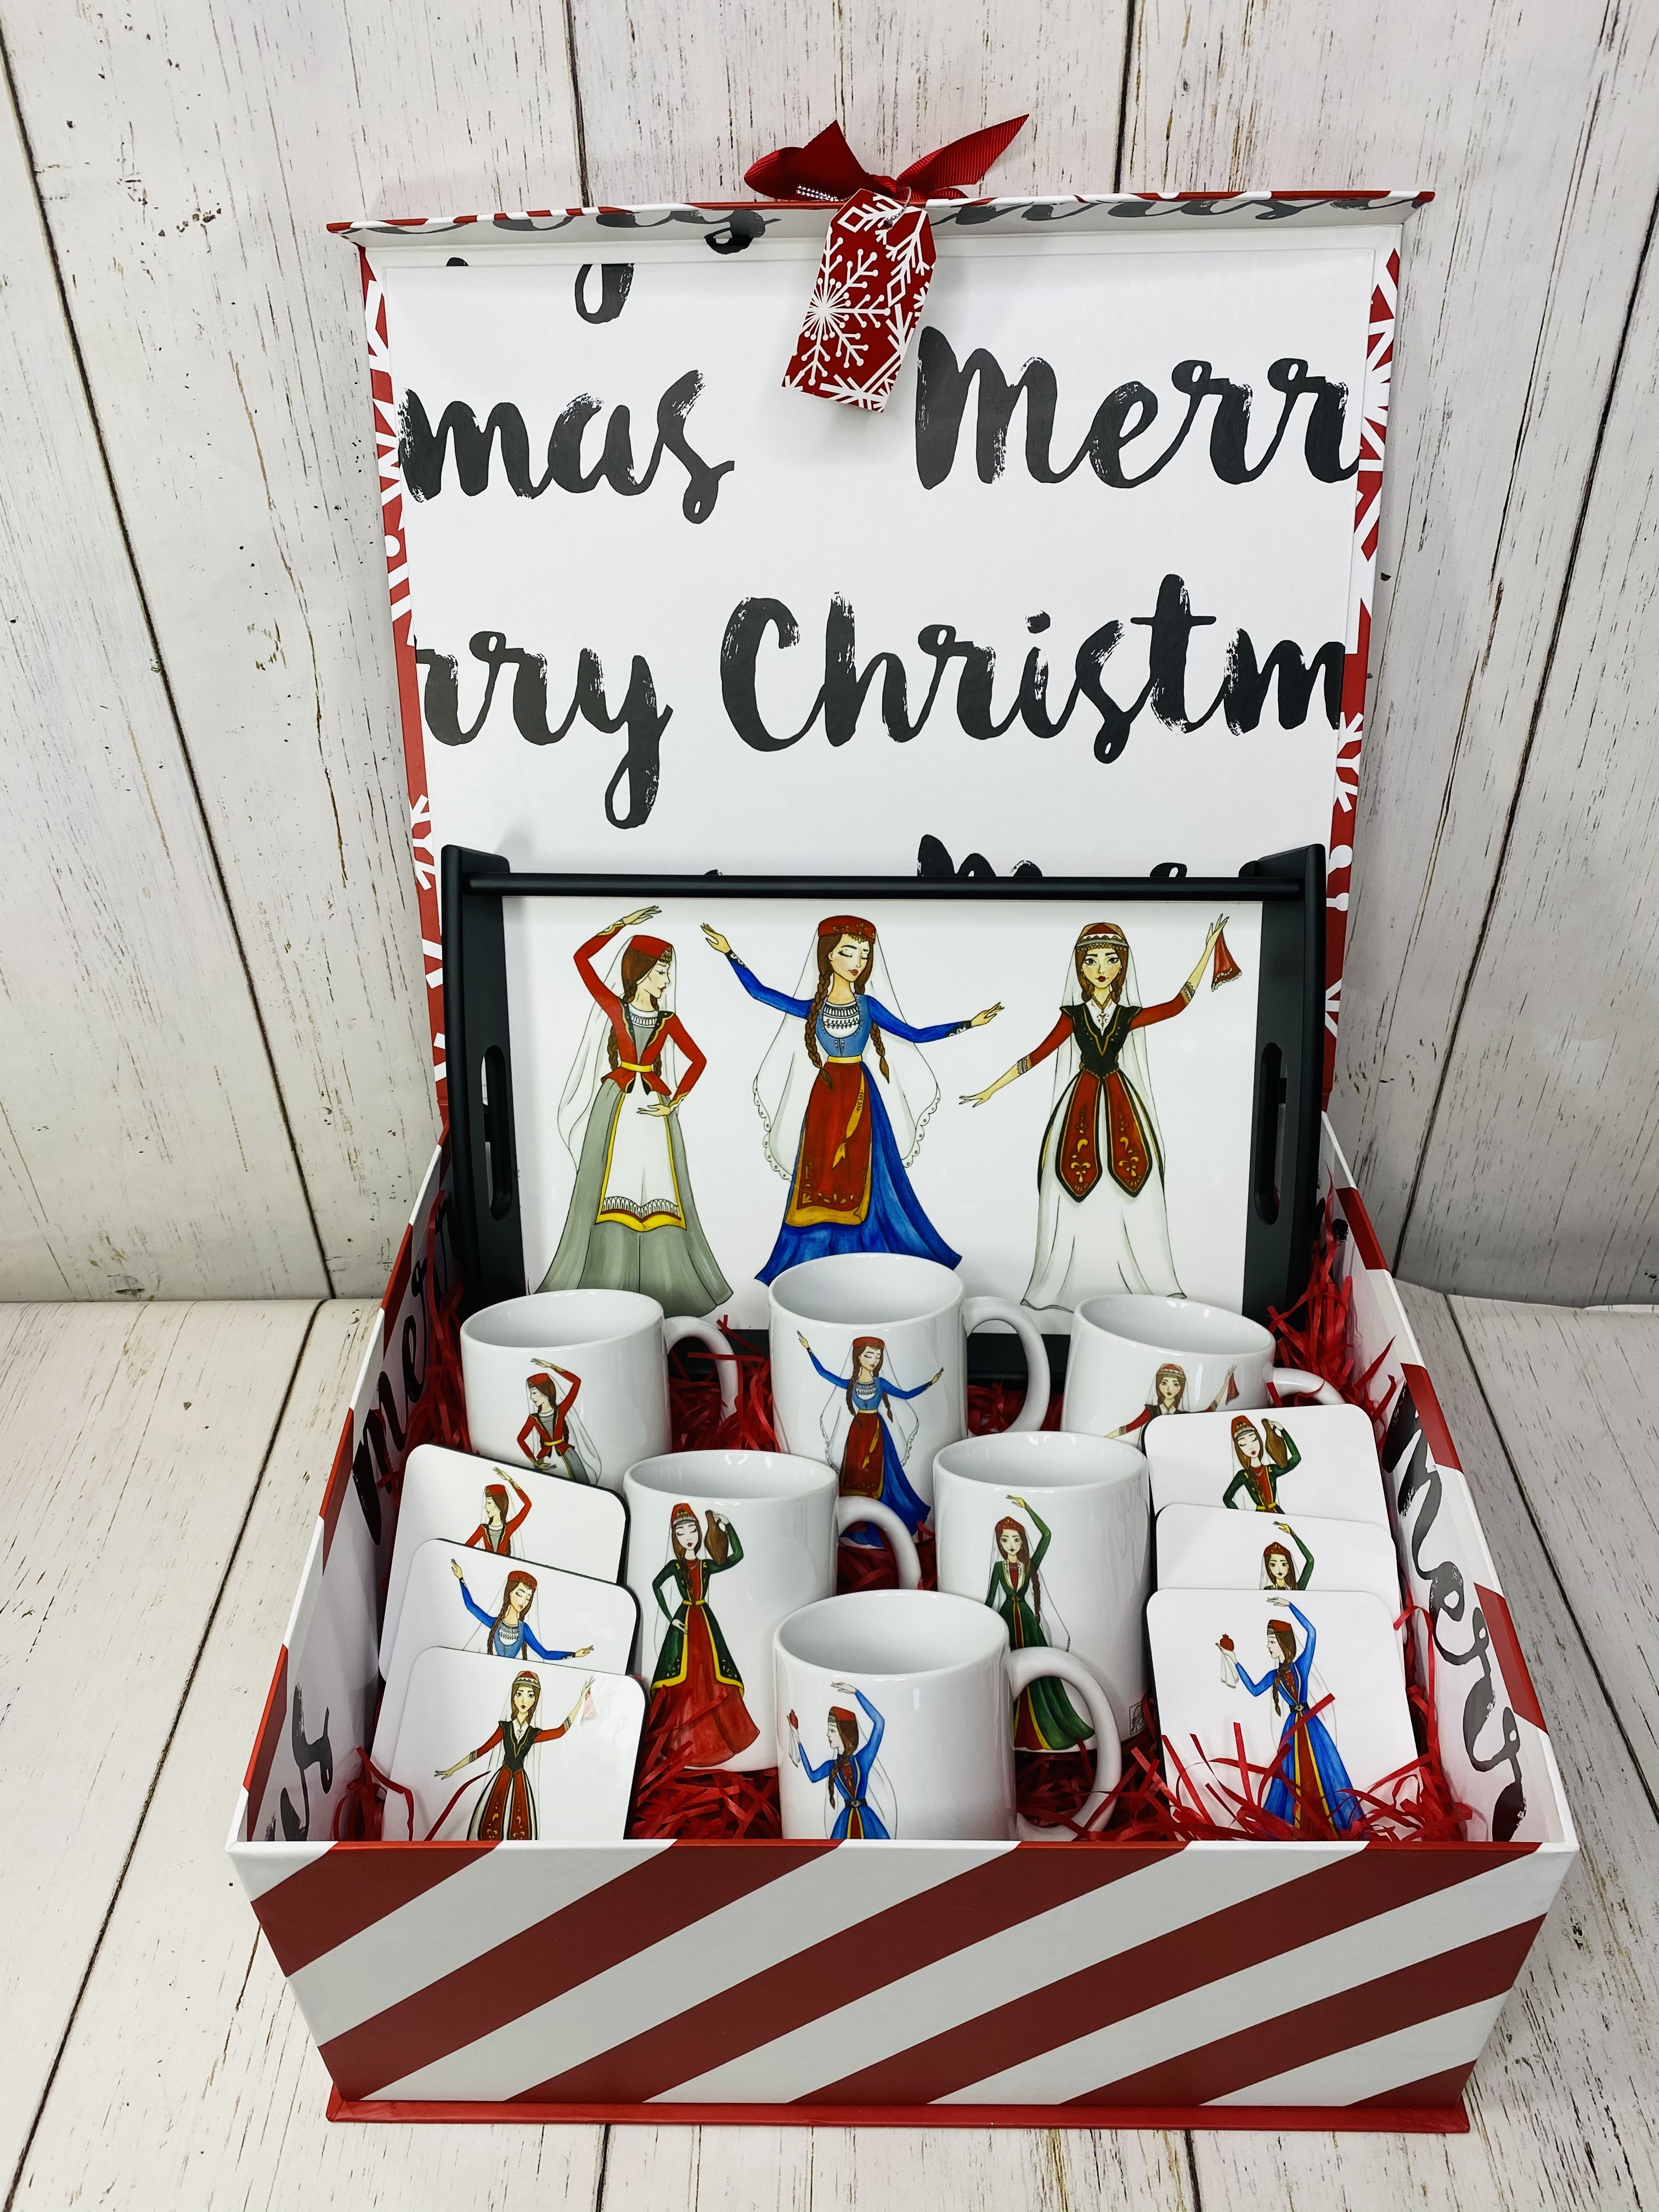 Armenian Beauty Collection with matching serving tray, mugs, and coasters